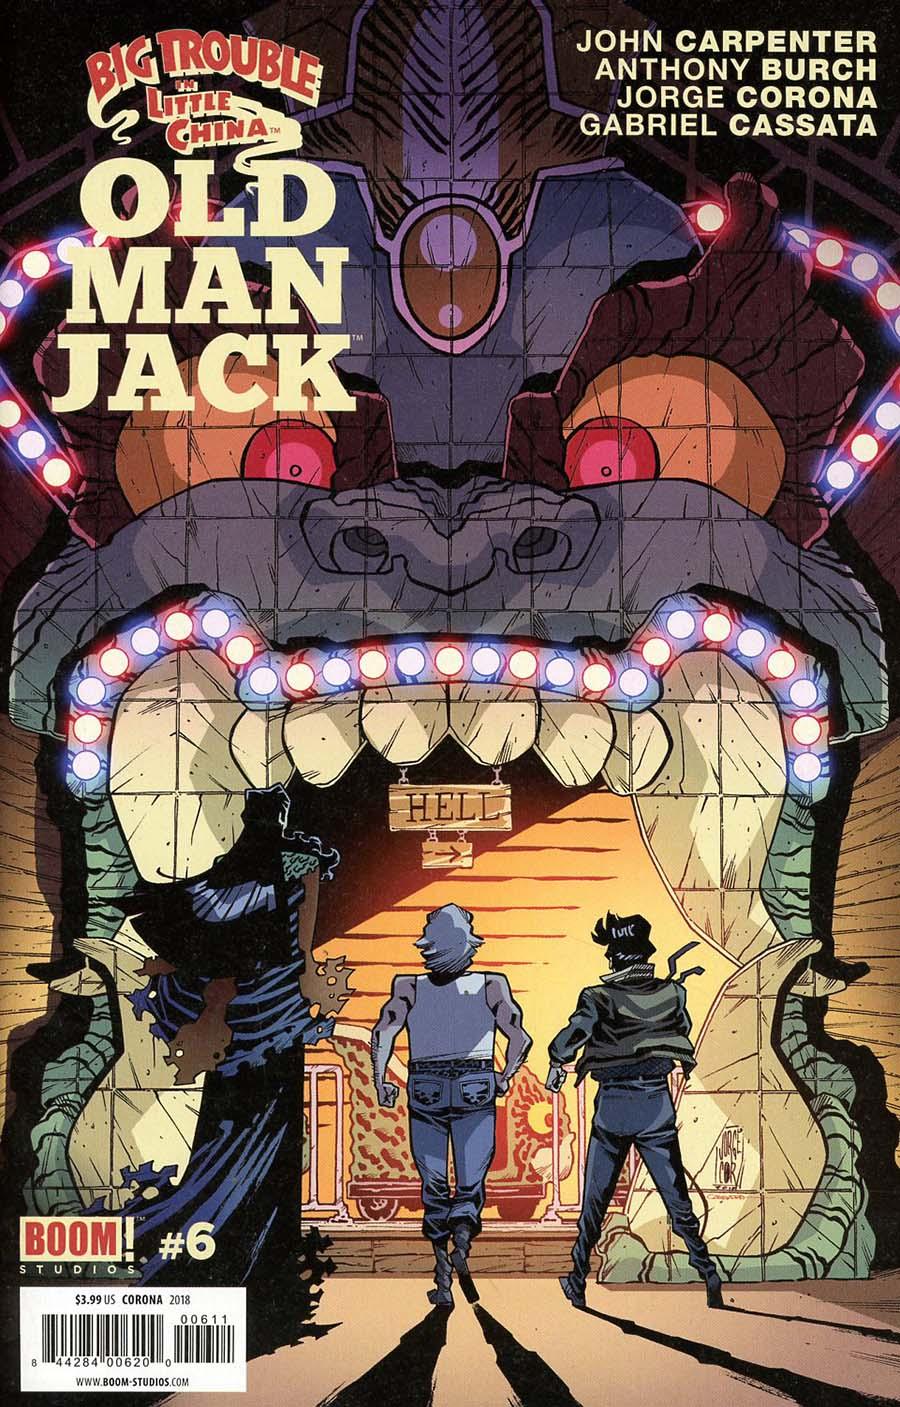 Big Trouble In Little China Old Man Jack Vol. 1 #6